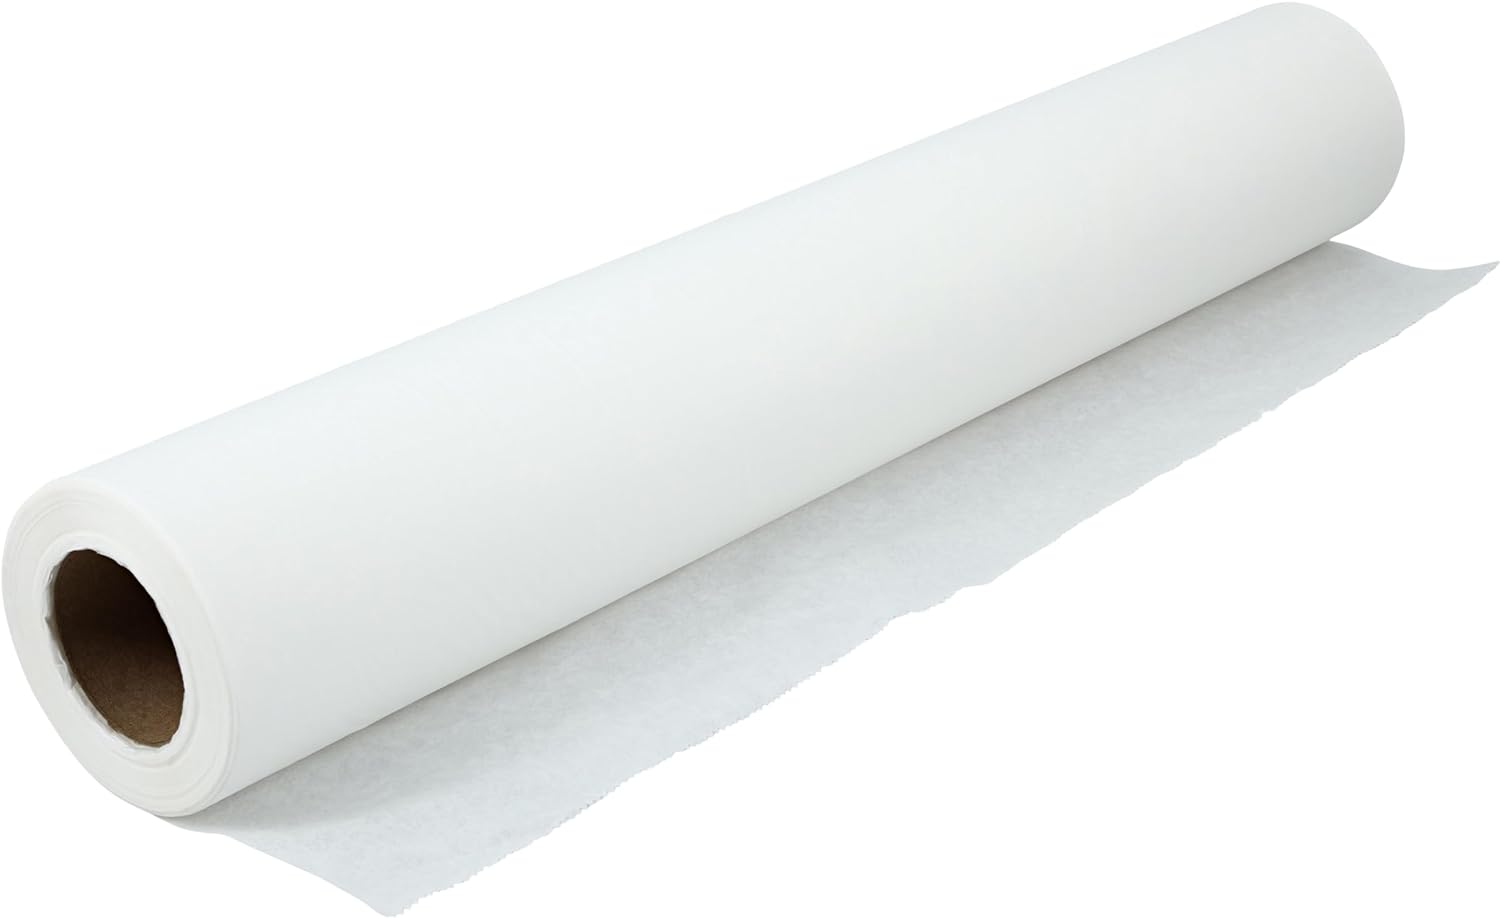 Henry Schein Exam Table Paper Smooth White, Disposable, Latex Free, Light Weight, Smooth for Patient Protection